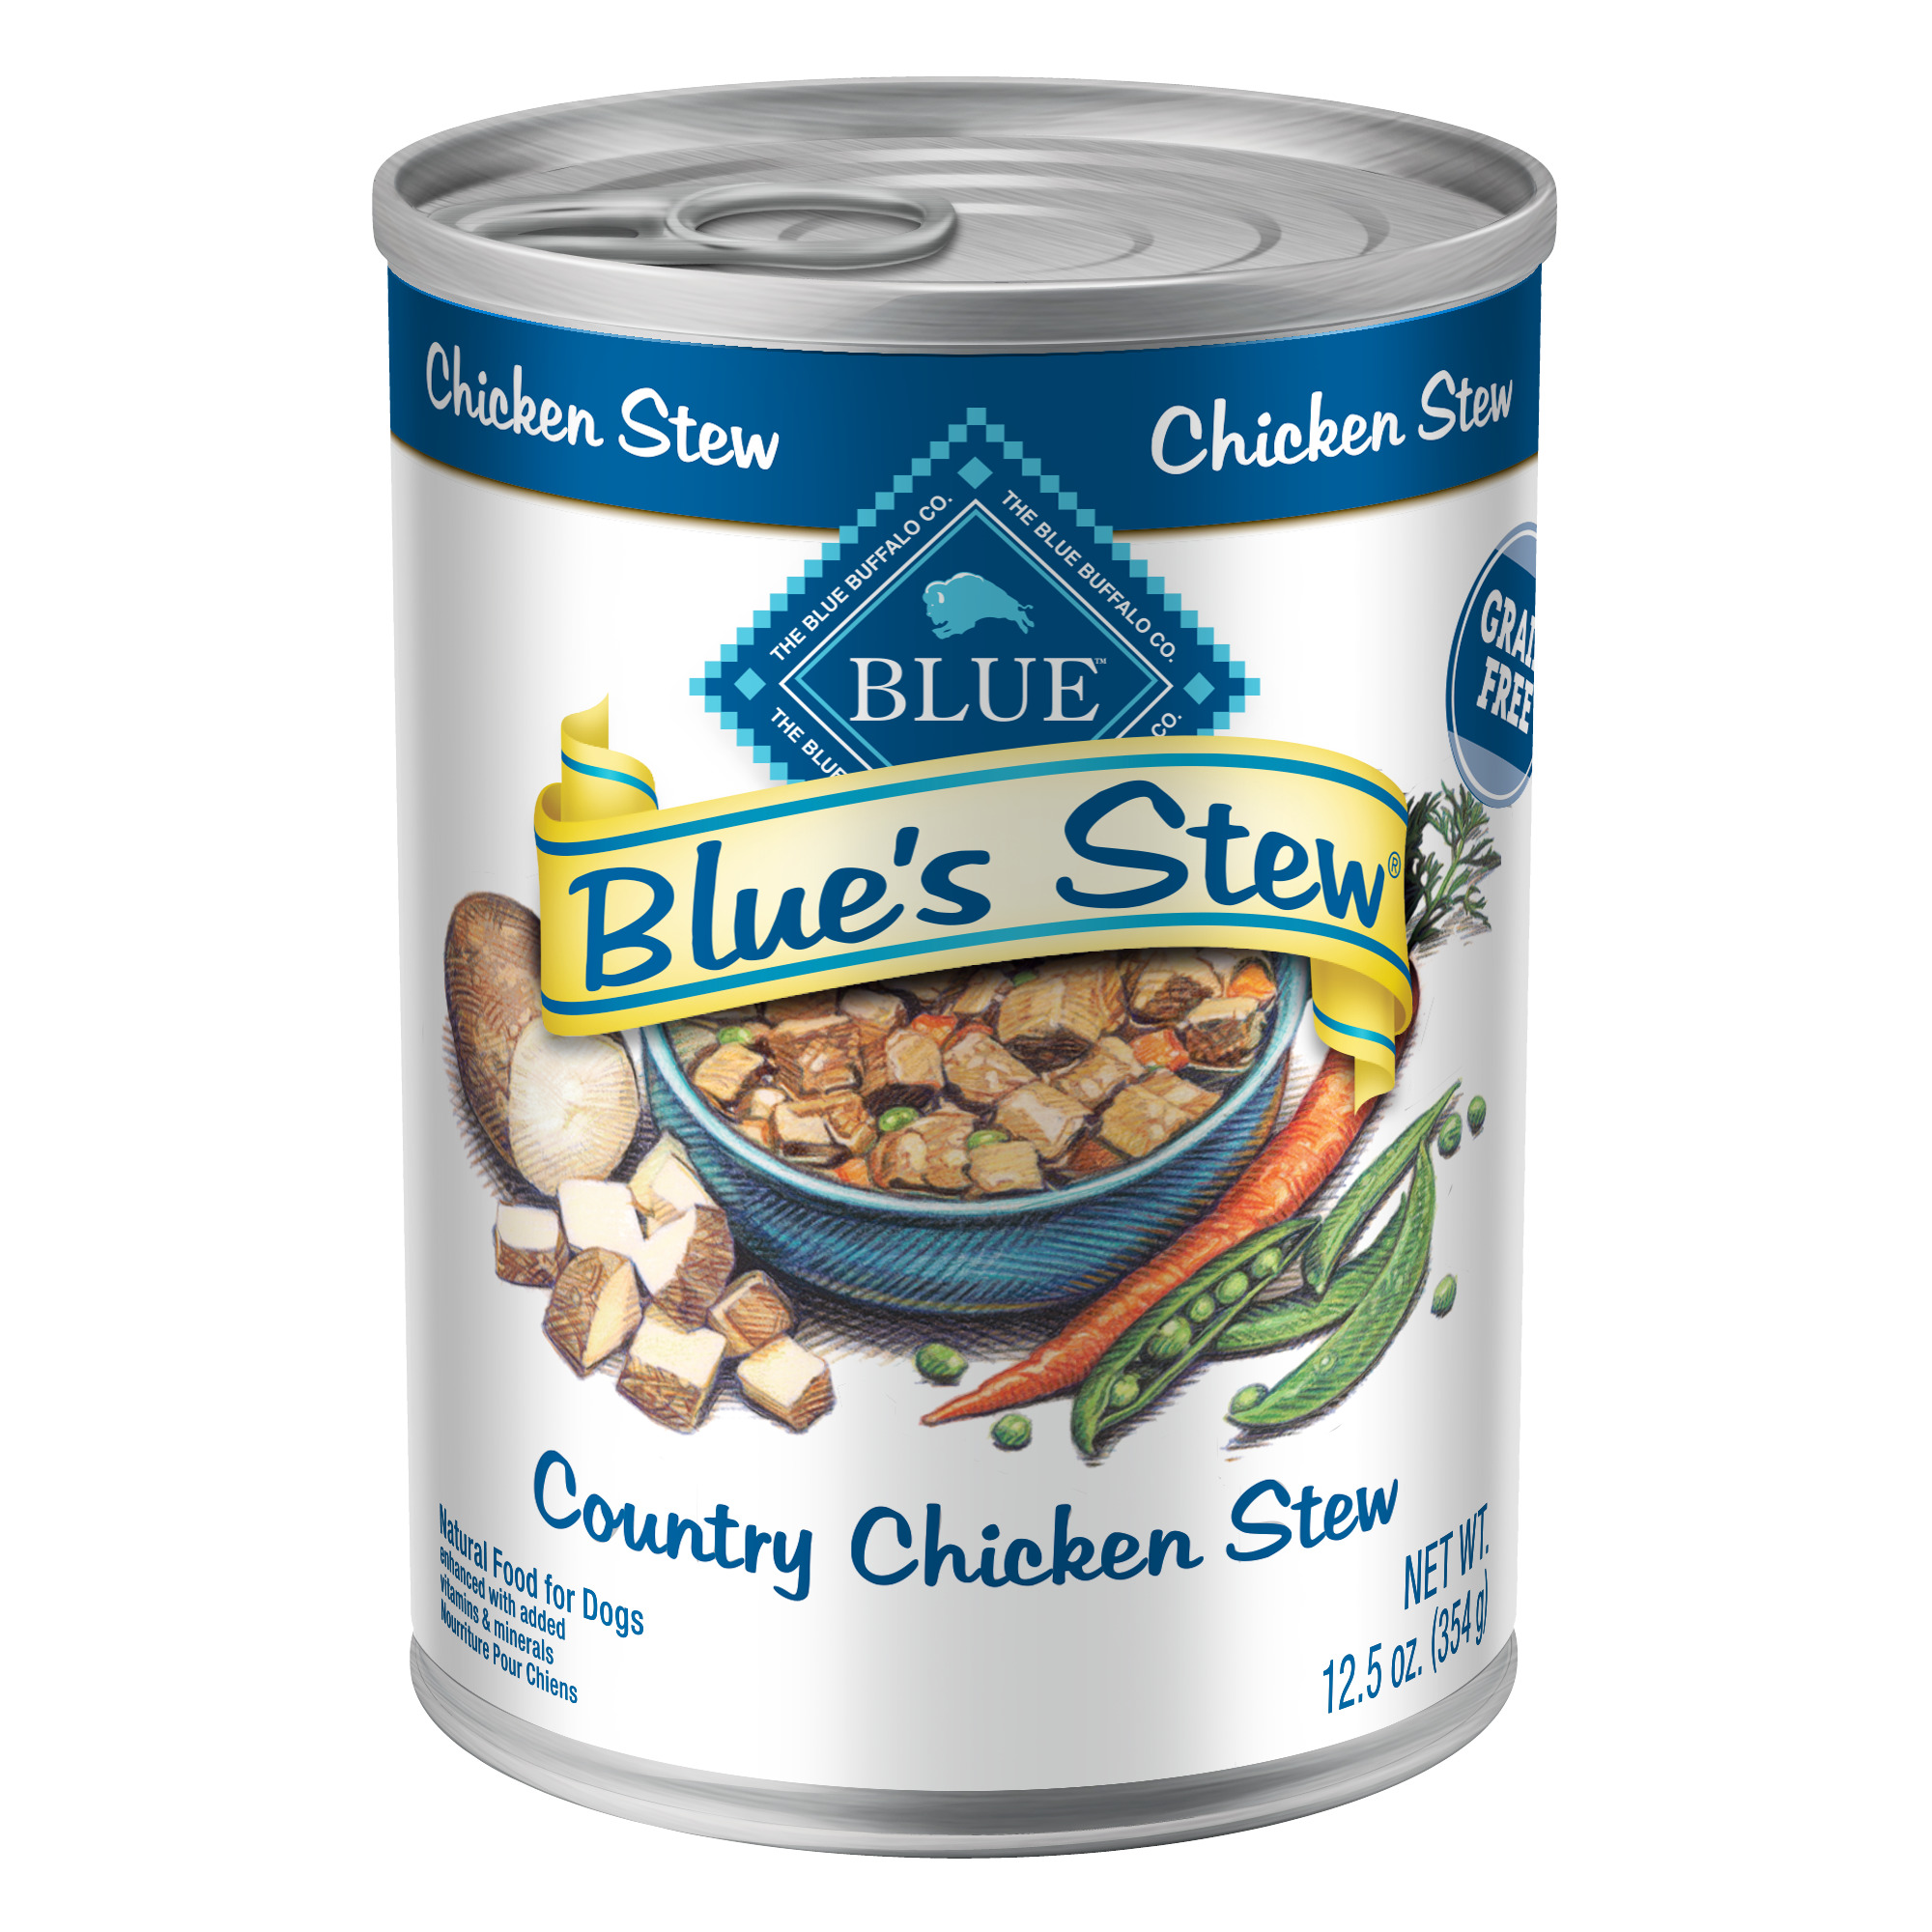 Blue's Stew Country Chicken Stew For Adult Dogs, 12.5 oz